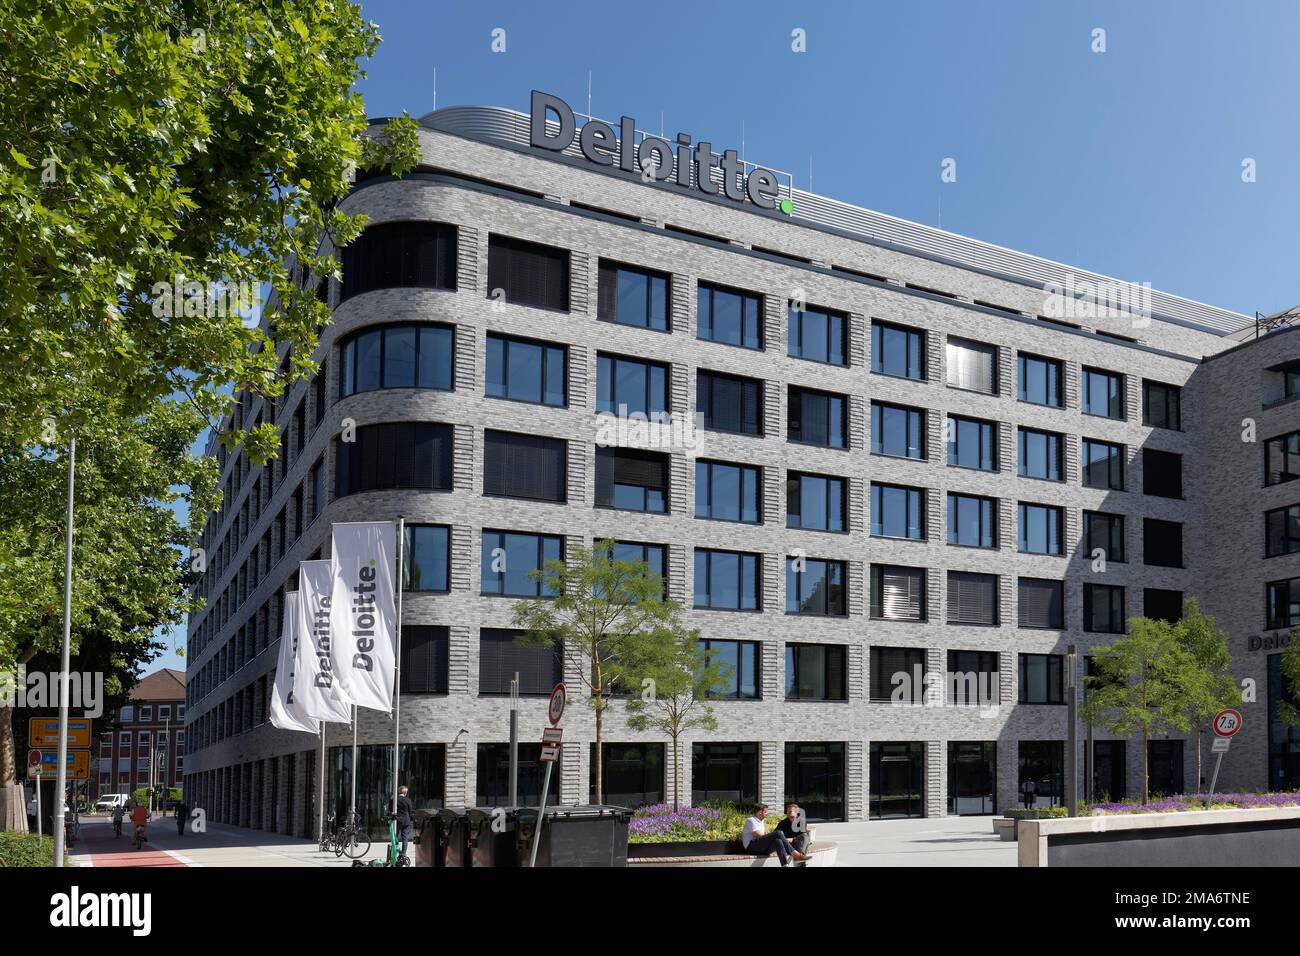 Deloitte Legal, Duesseldorf office, law firm, auditing firm, North Rhine-Westphalia, Germany Stock Photo